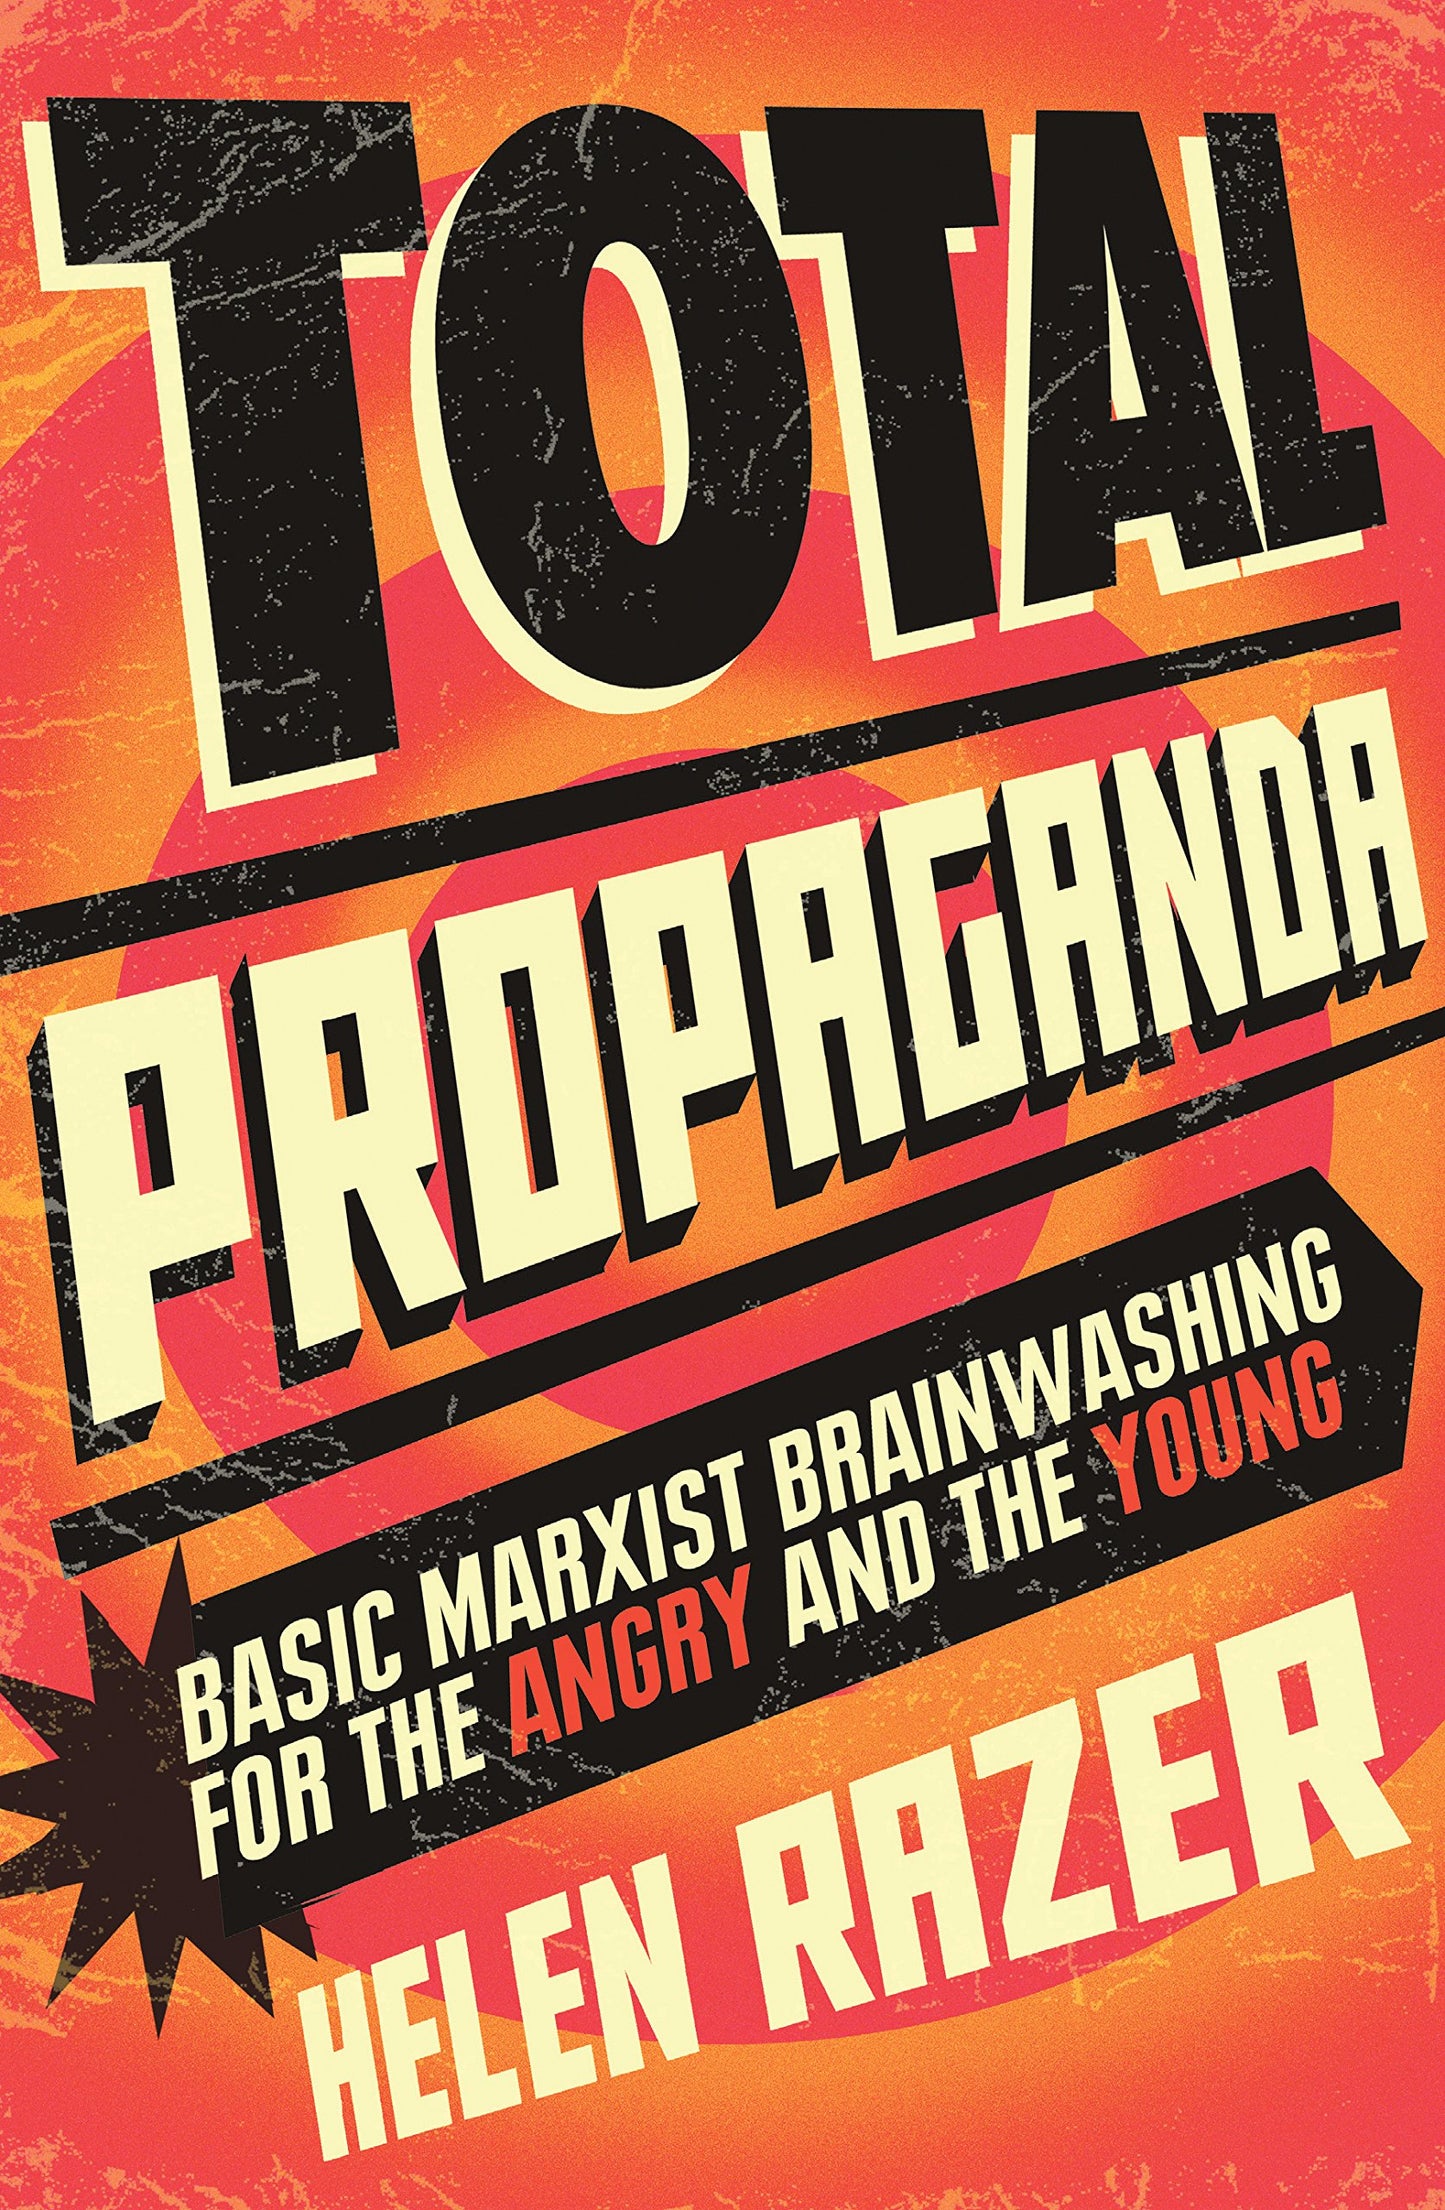 Total Propaganda: Basic Marxist Brainwashing for the Angry and the Young by Helen Razer at Chapters online bookstore Pakistan